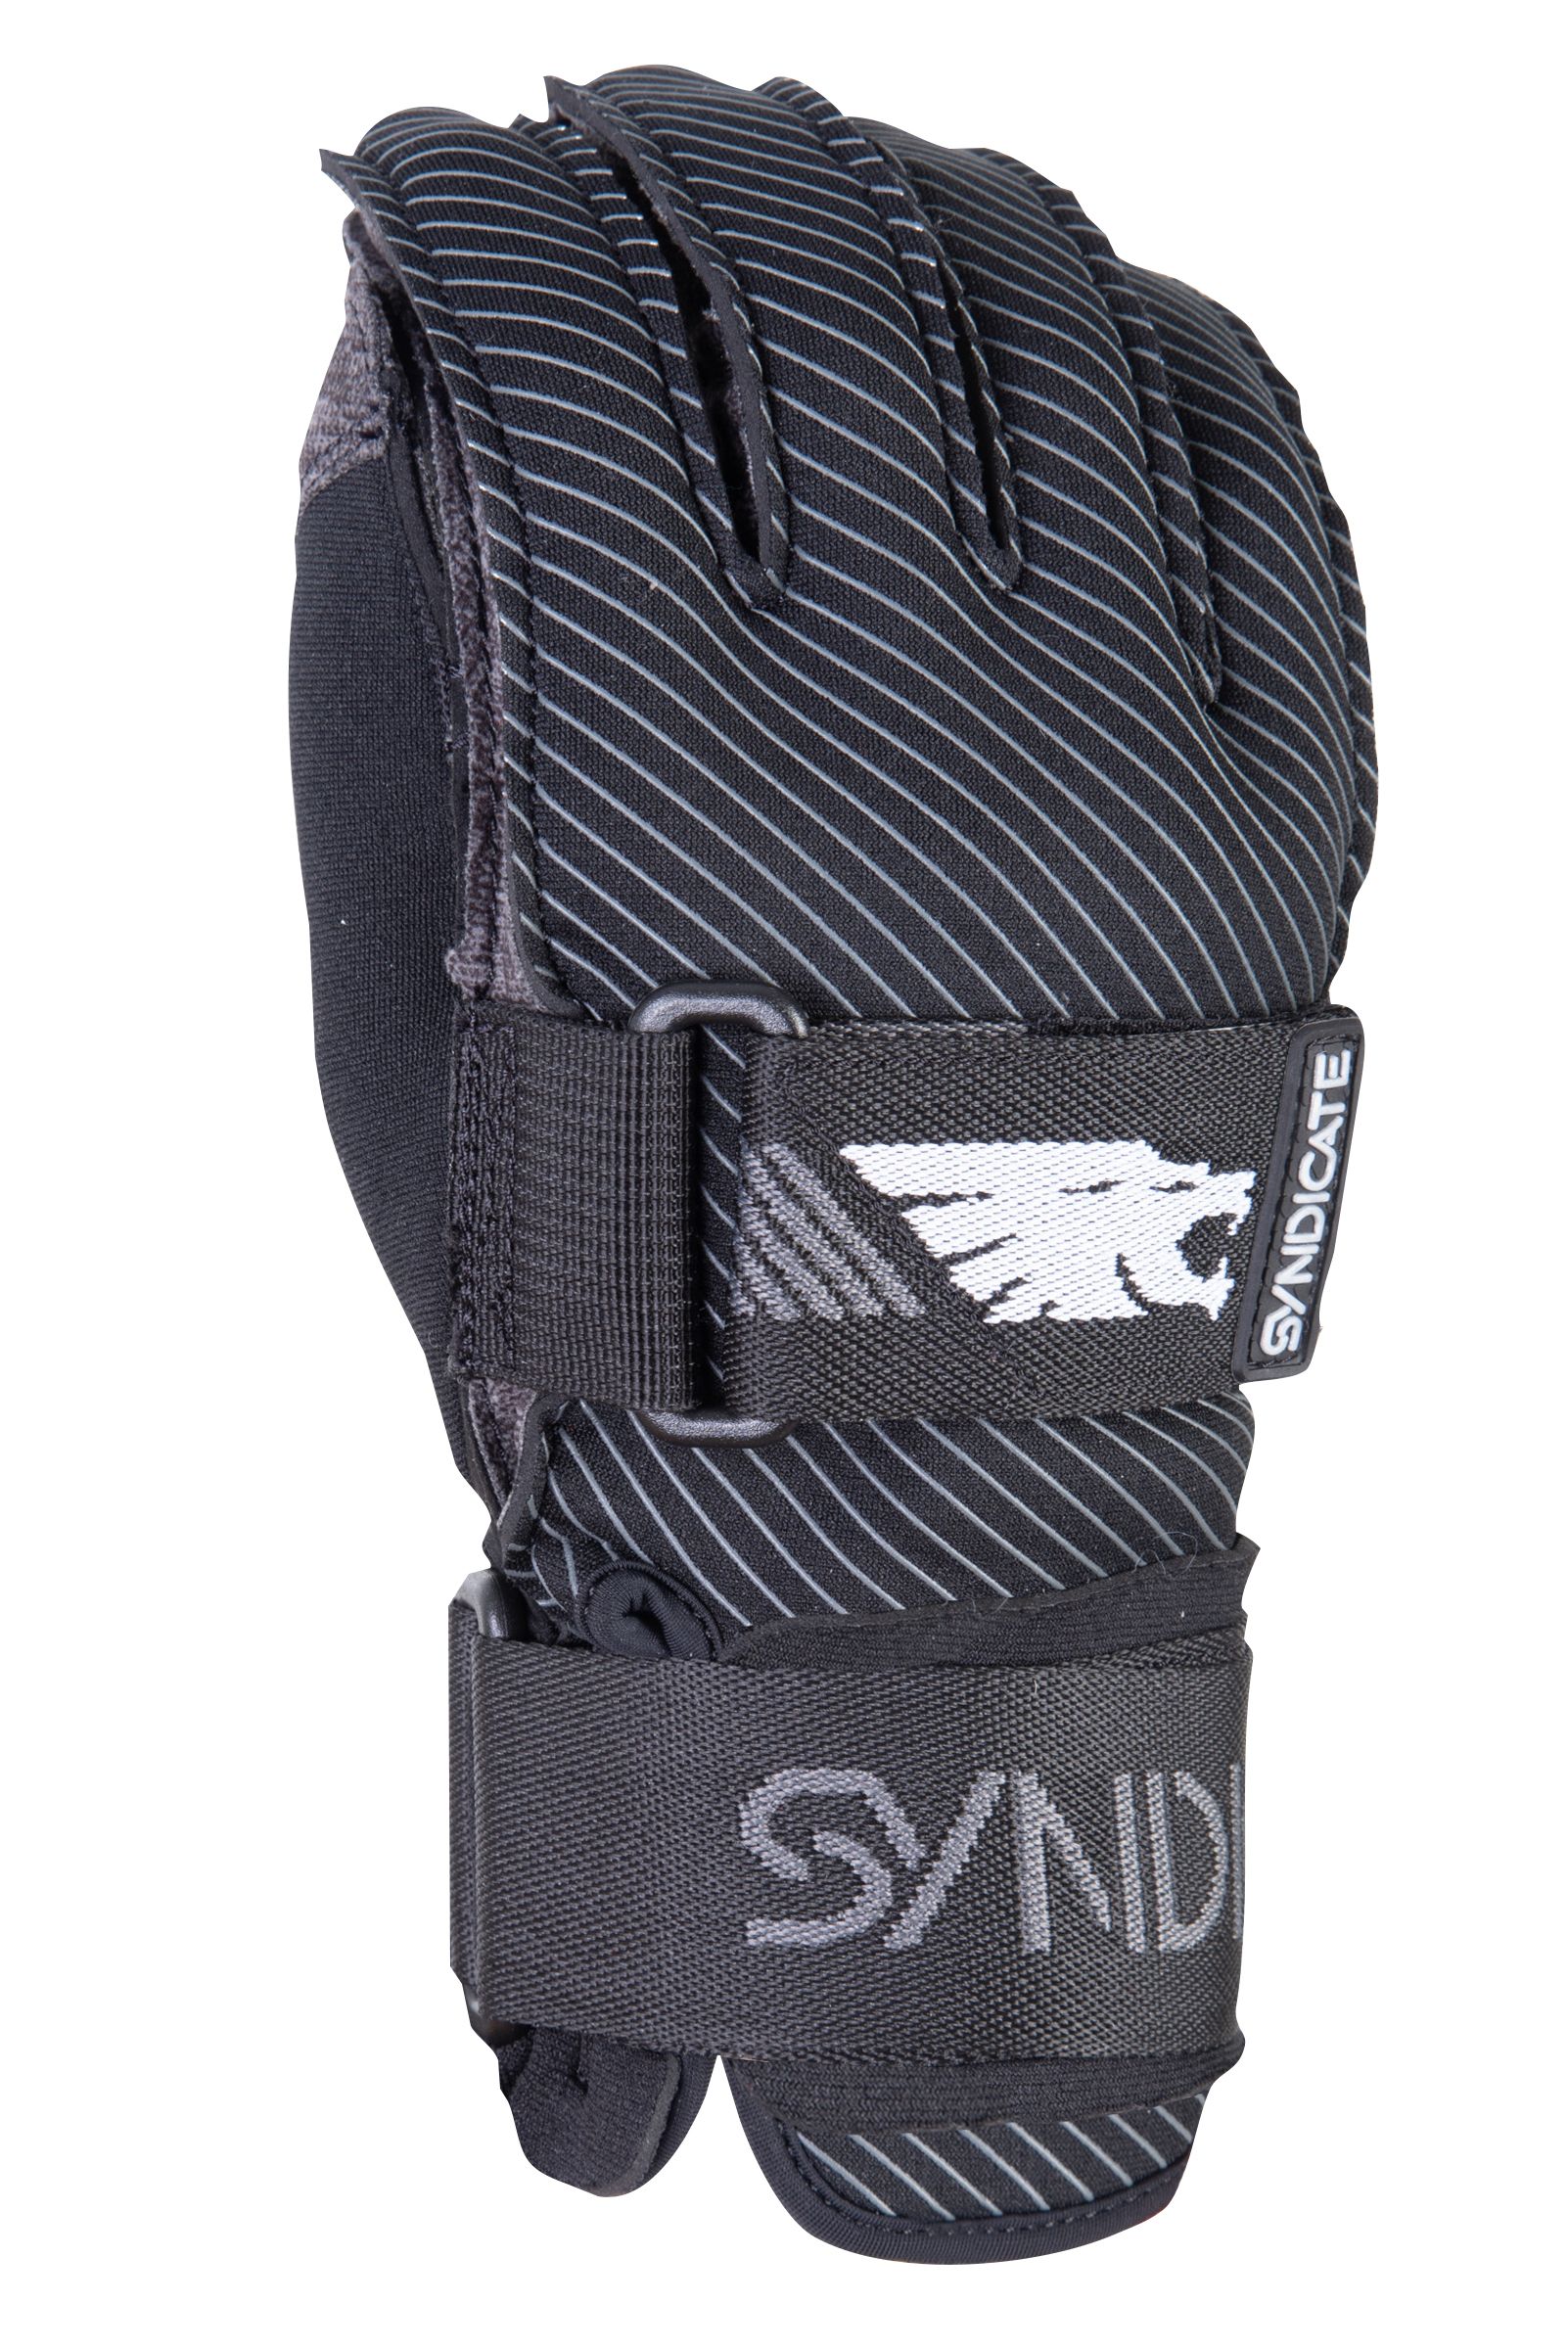 HO SYNDICATE GLOVE 41 TAIL - INSIDE OUT GLOVE - M